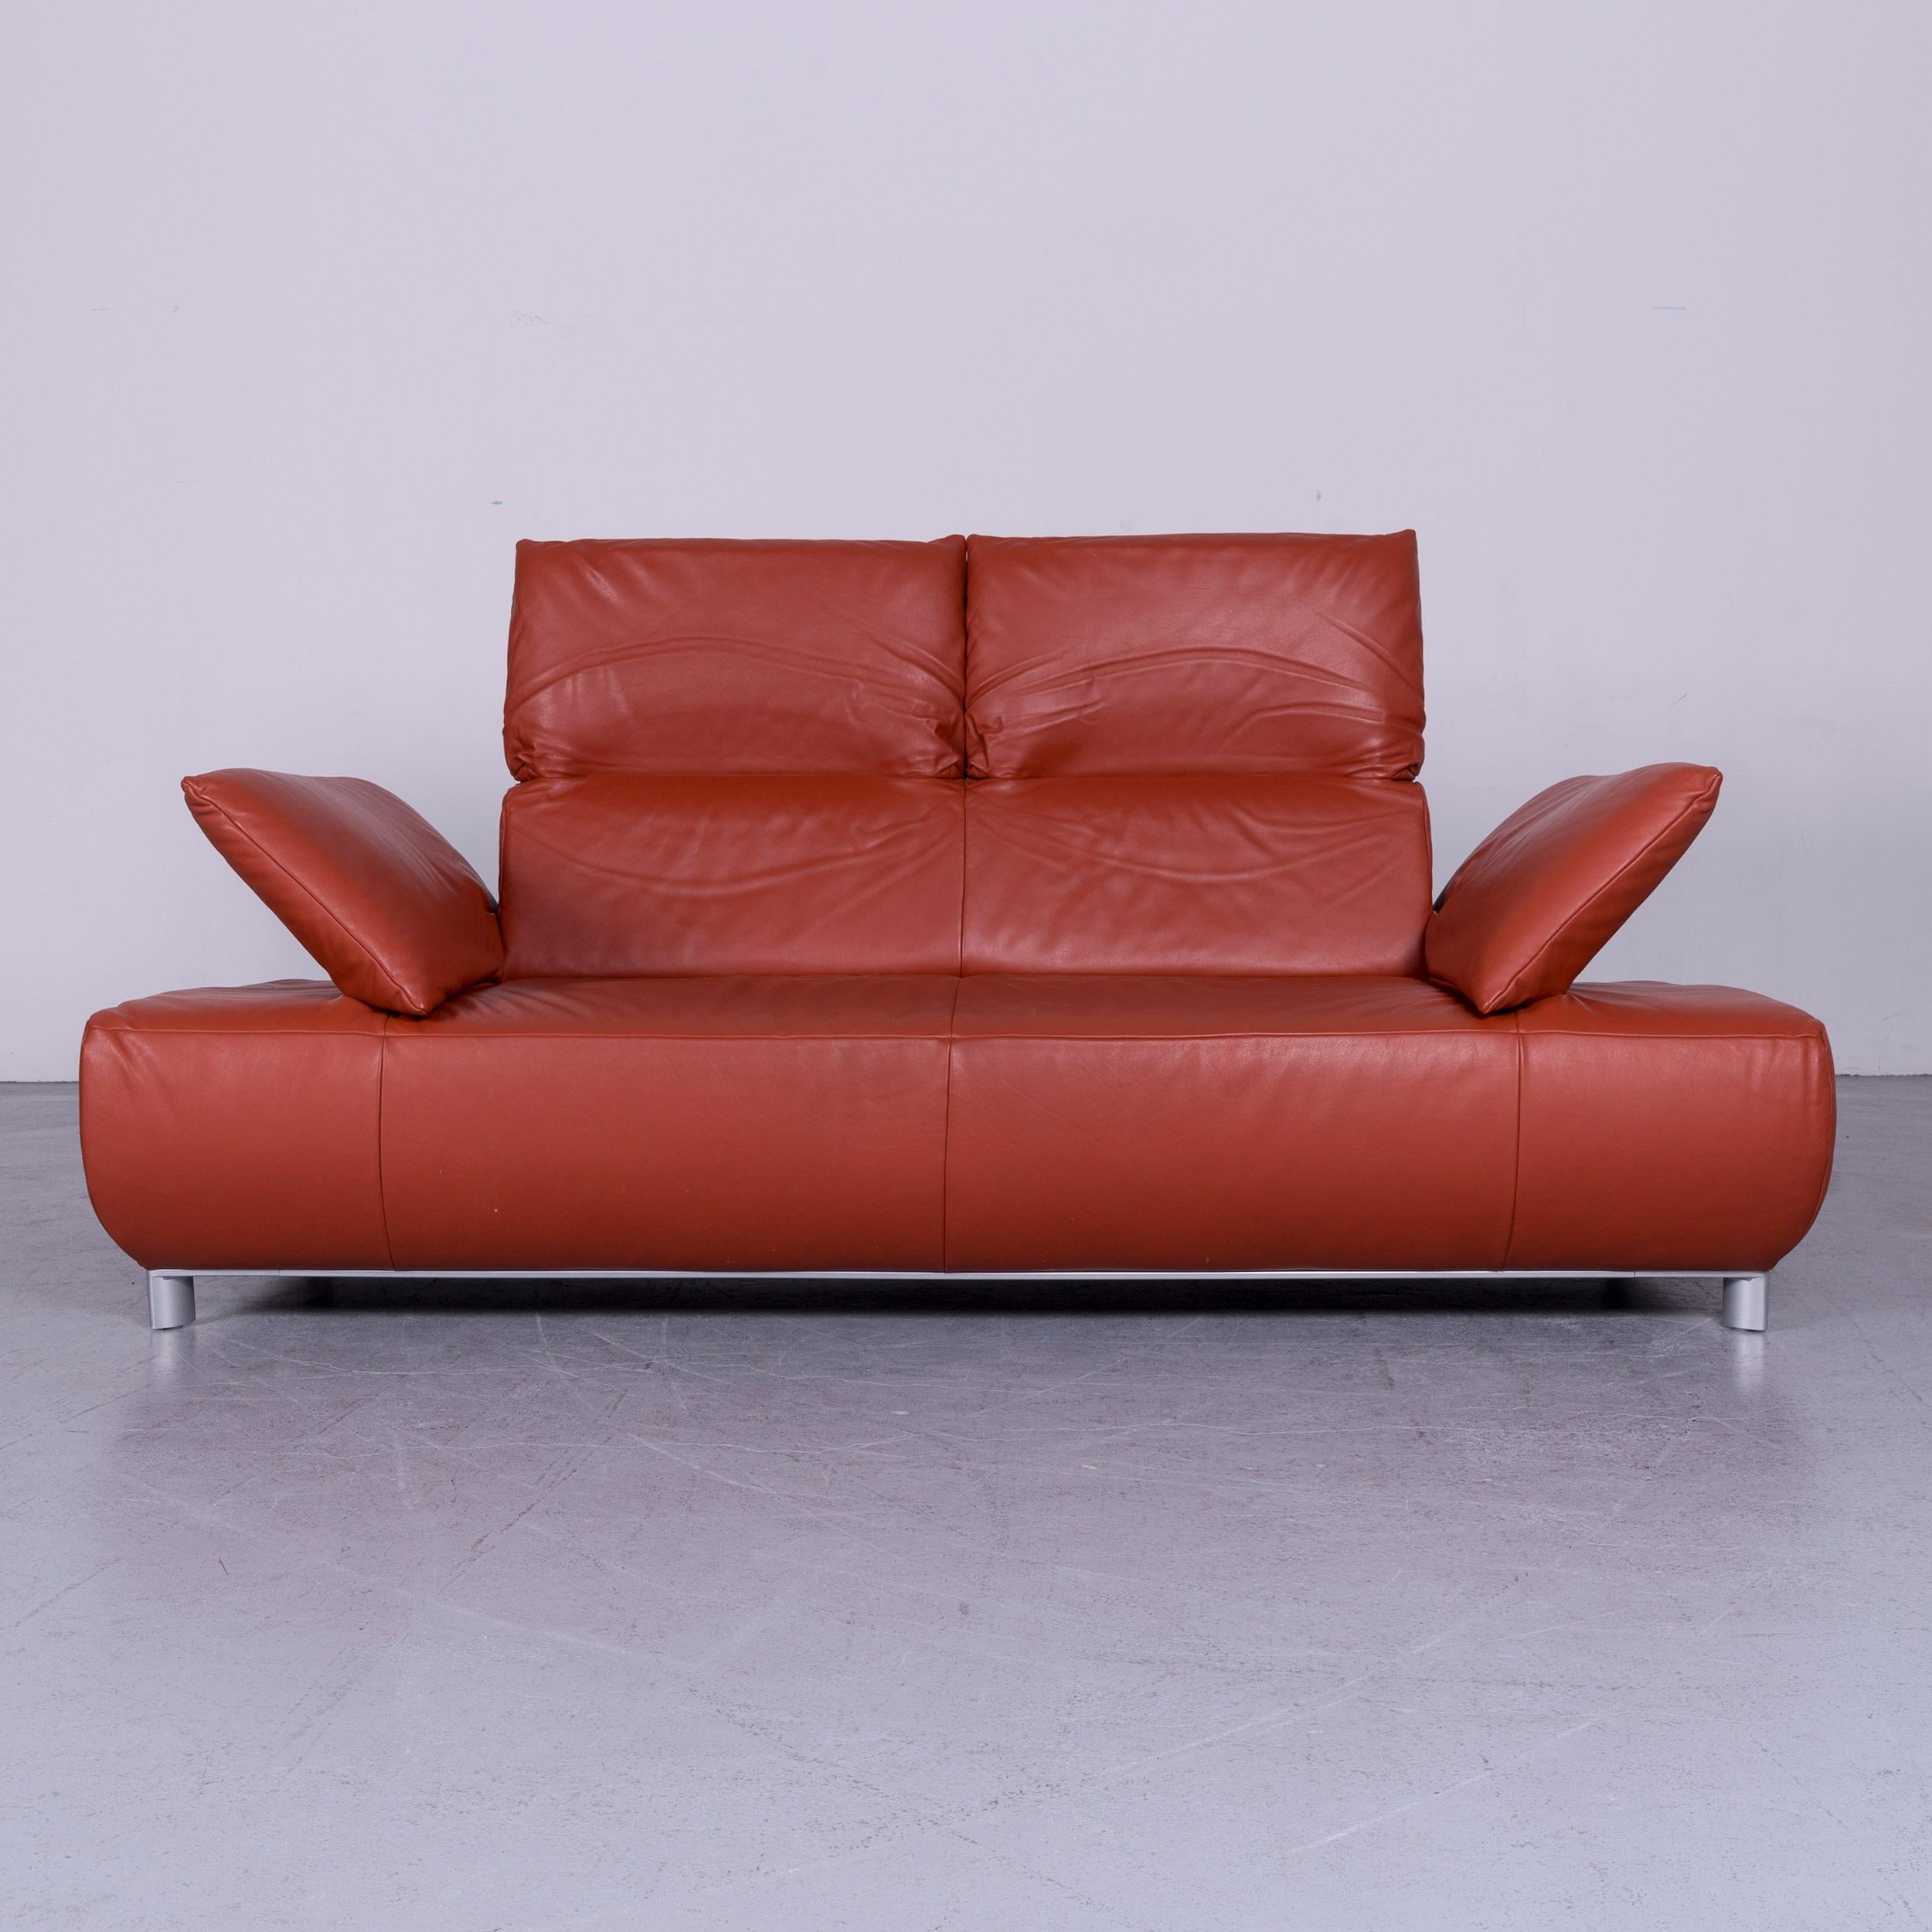 We bring to you an Koinor Volare designer leather sofa red three-seat couch with function.